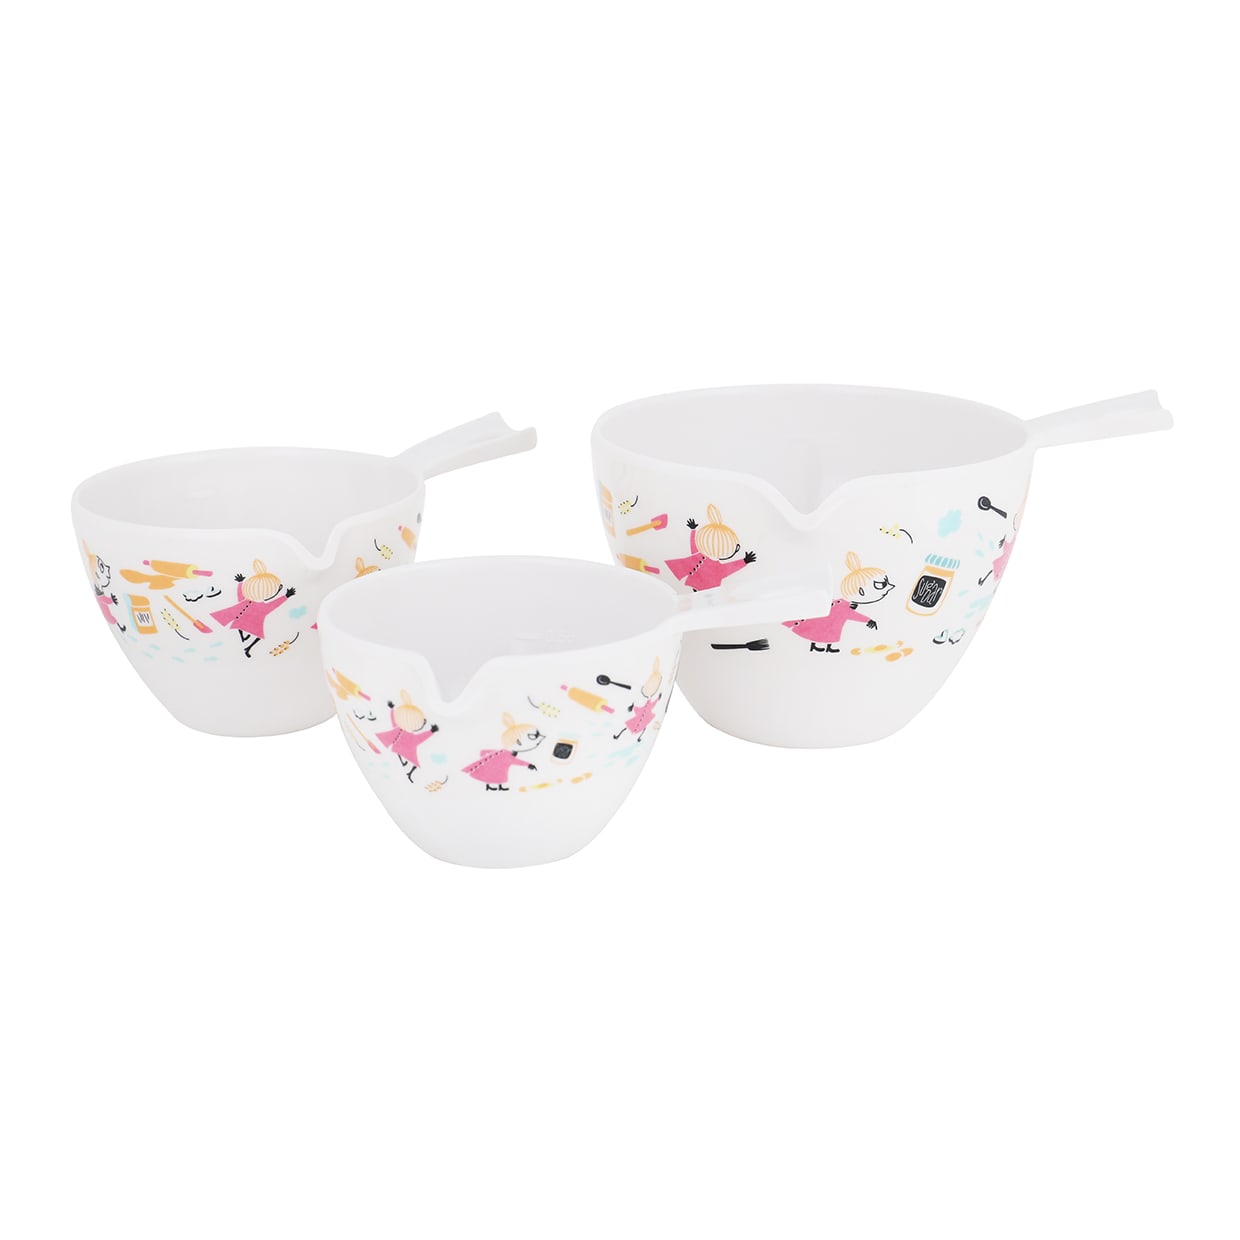 Moomin Little My Red Baking Melamine Measuring Cups Set of 3